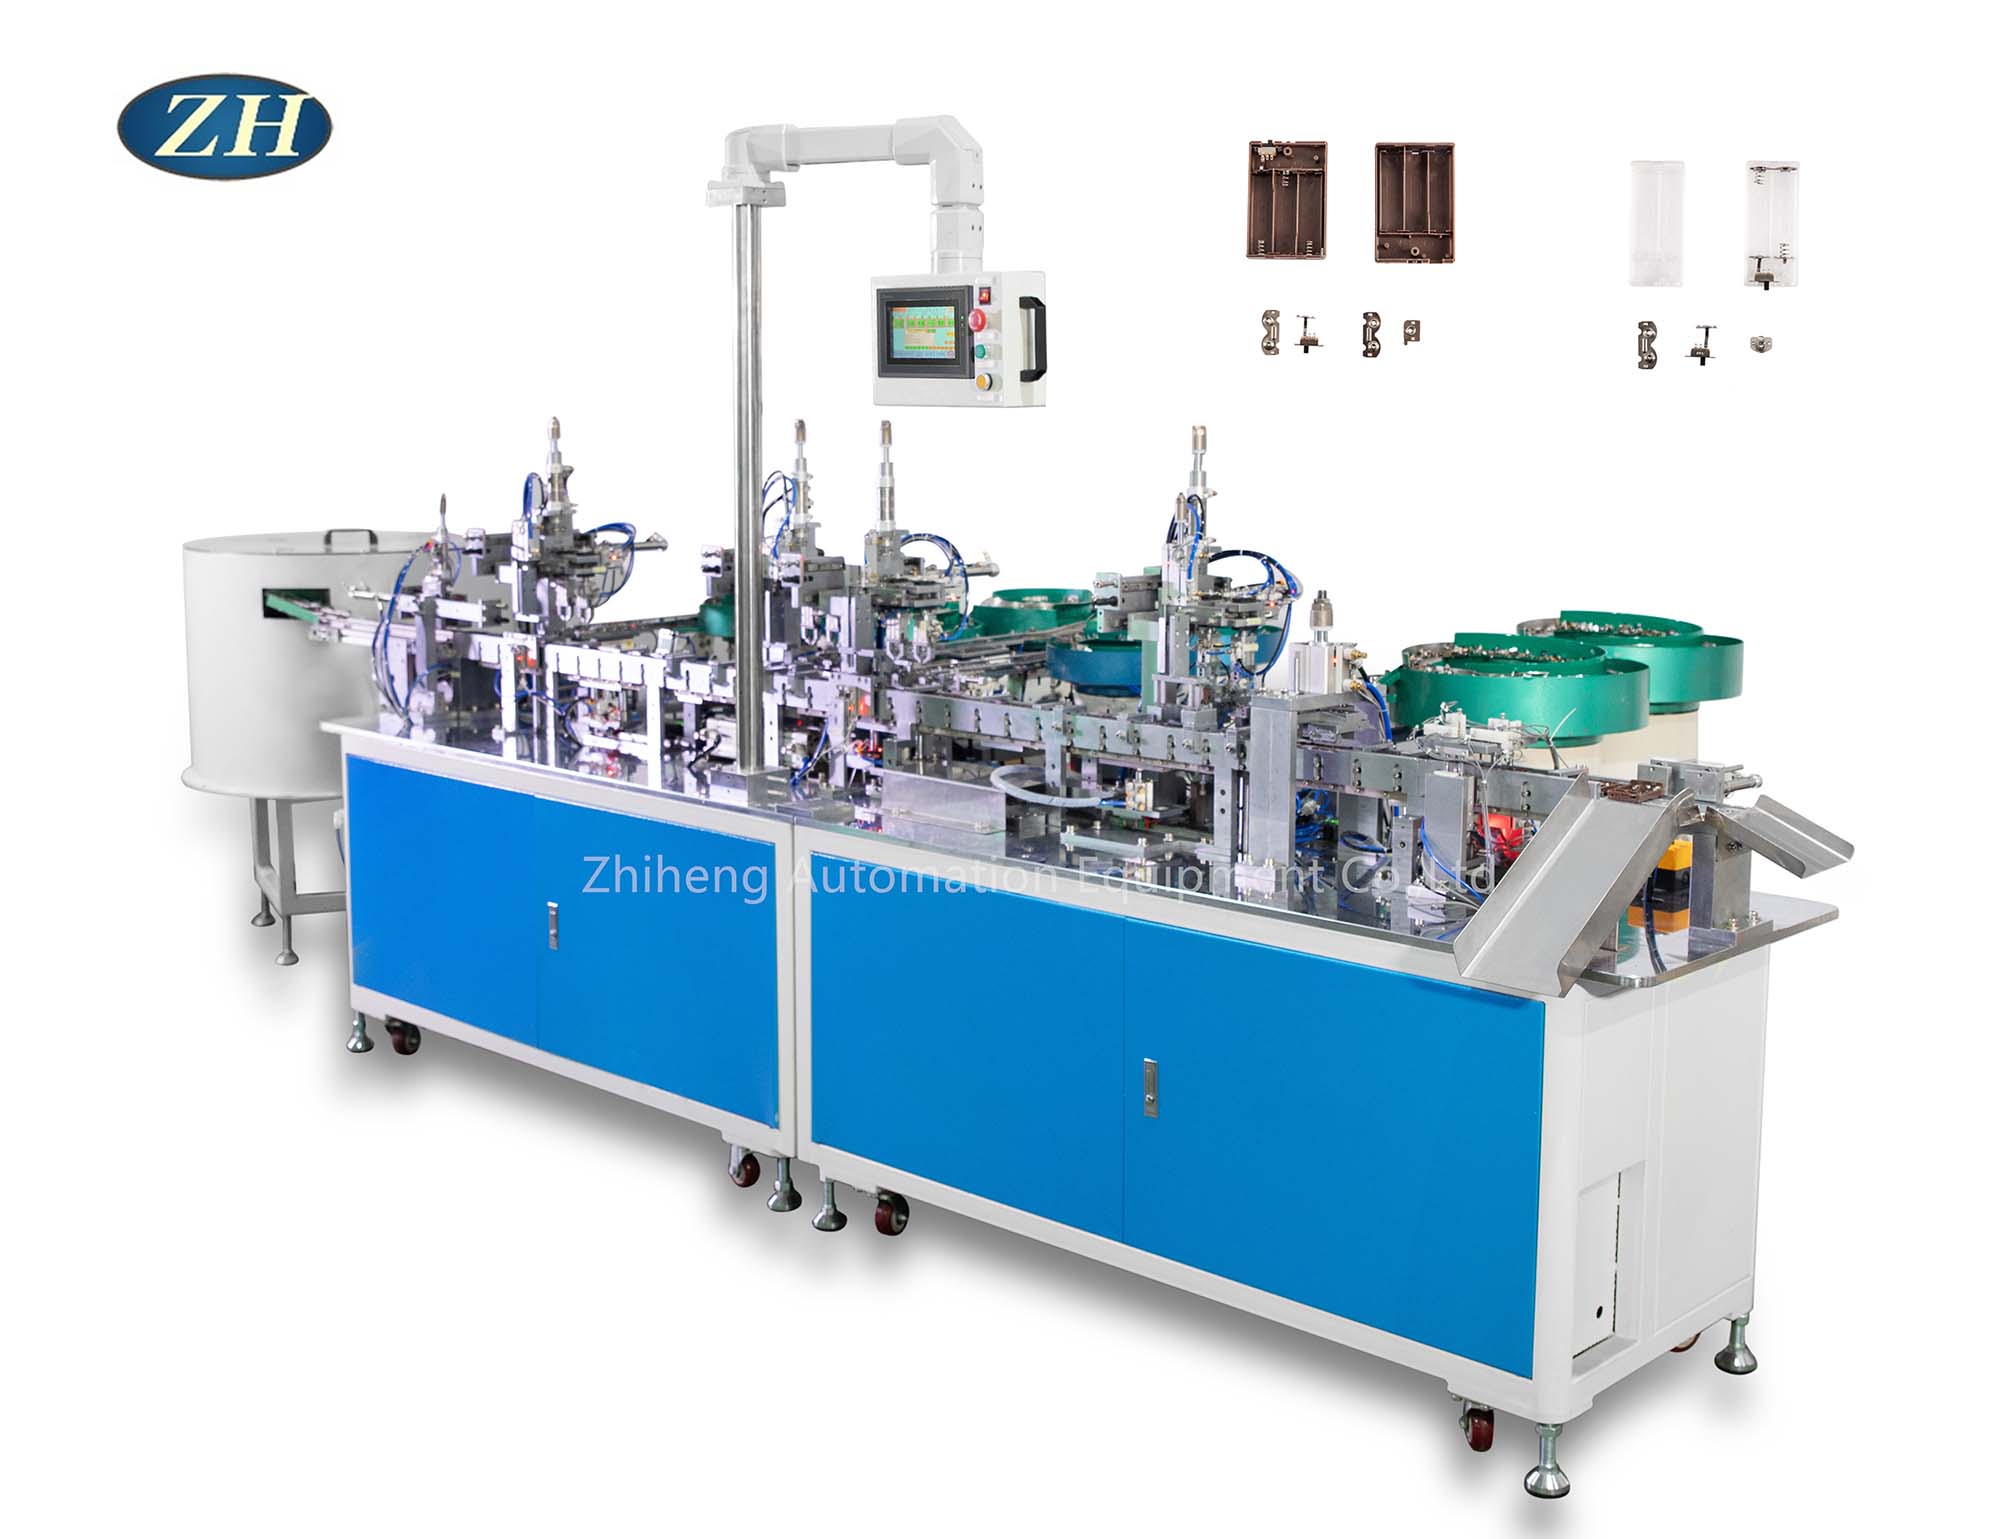 Automatic Assembly Machine for Battery Holder 